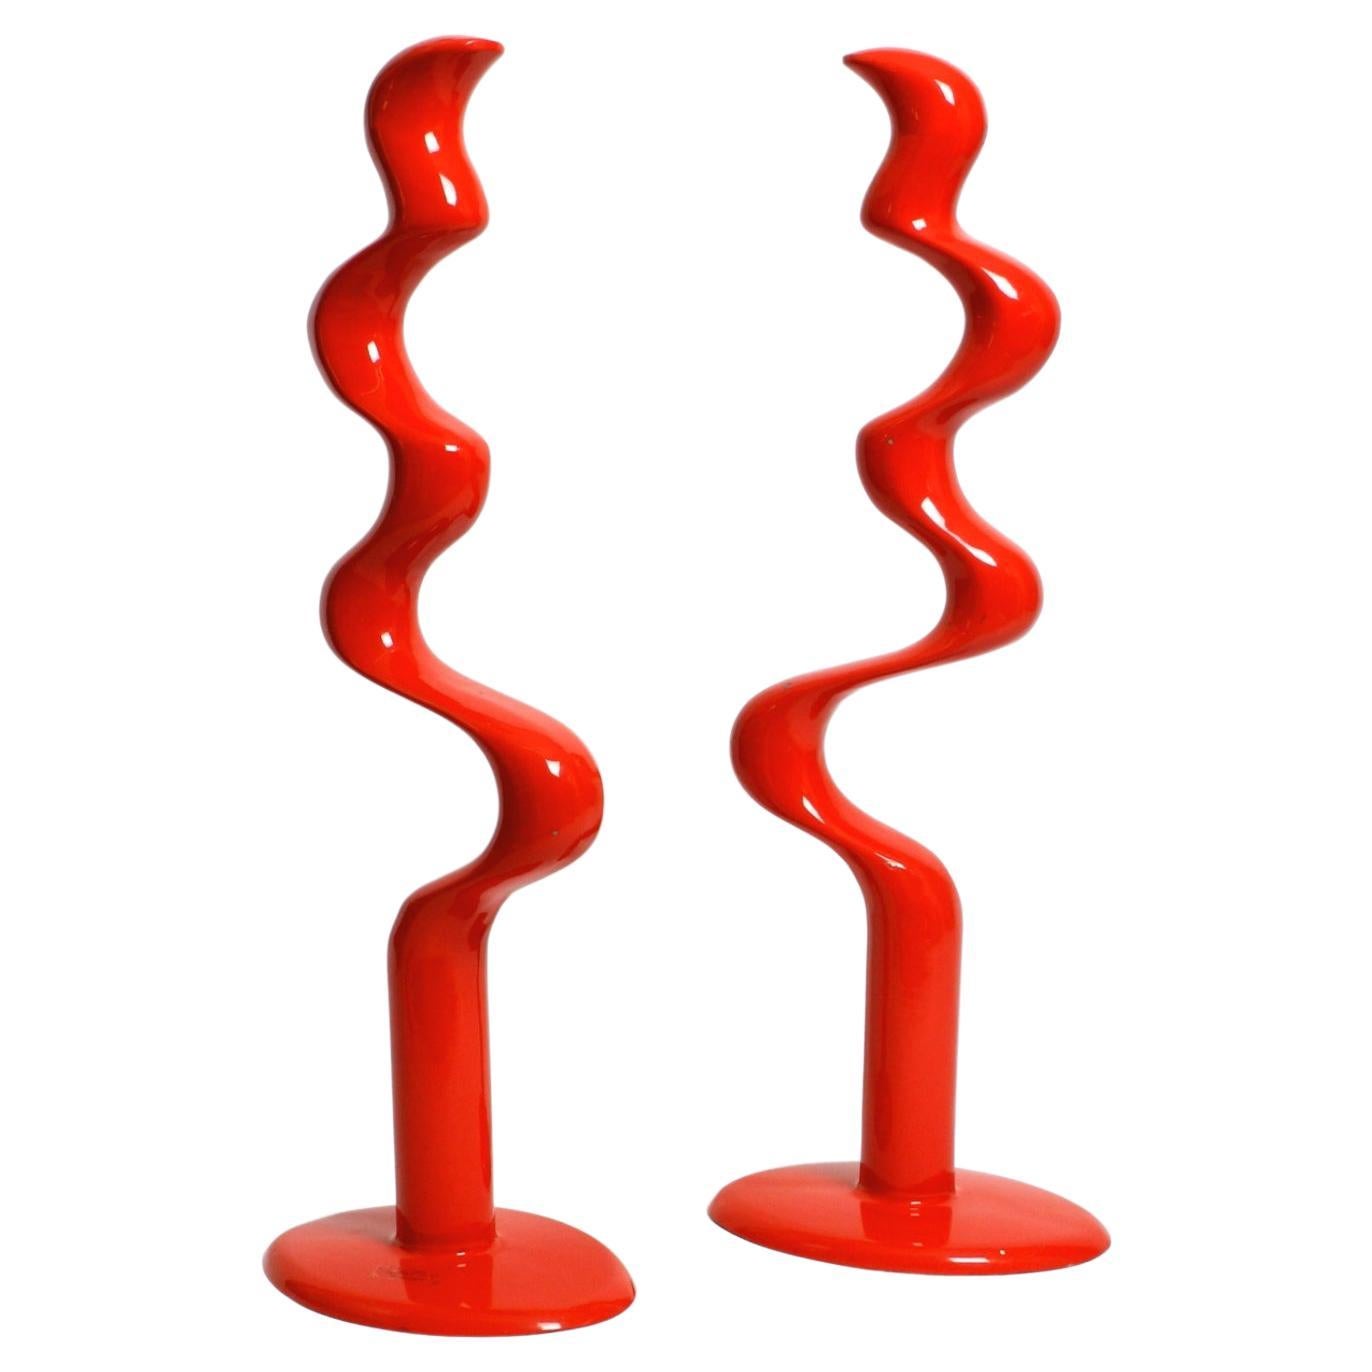 Two abstract metal floor sculptures by Tony Almén and Peter Gest for Ikea 1990